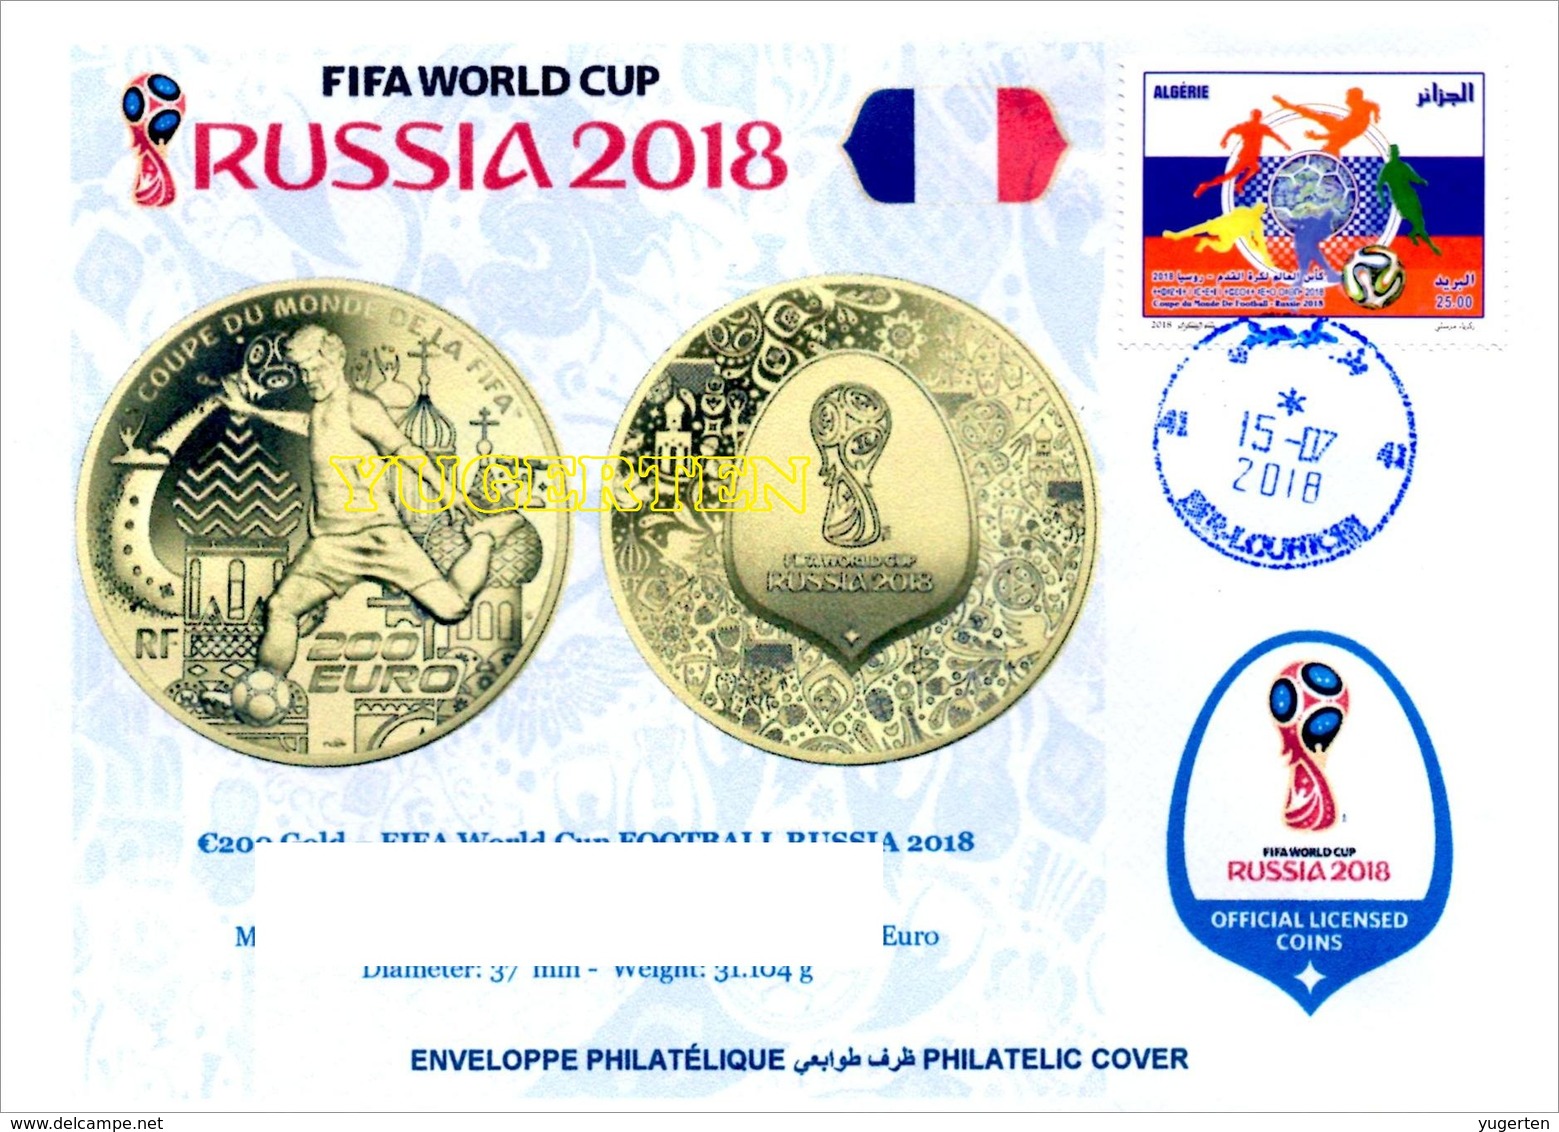 ARGHELIA - Philatelic Cover FRANCE 200 € Coins Banknotes Currencies Money FIFA Football World Cup Russia 2018 Münzen - 2018 – Rusia